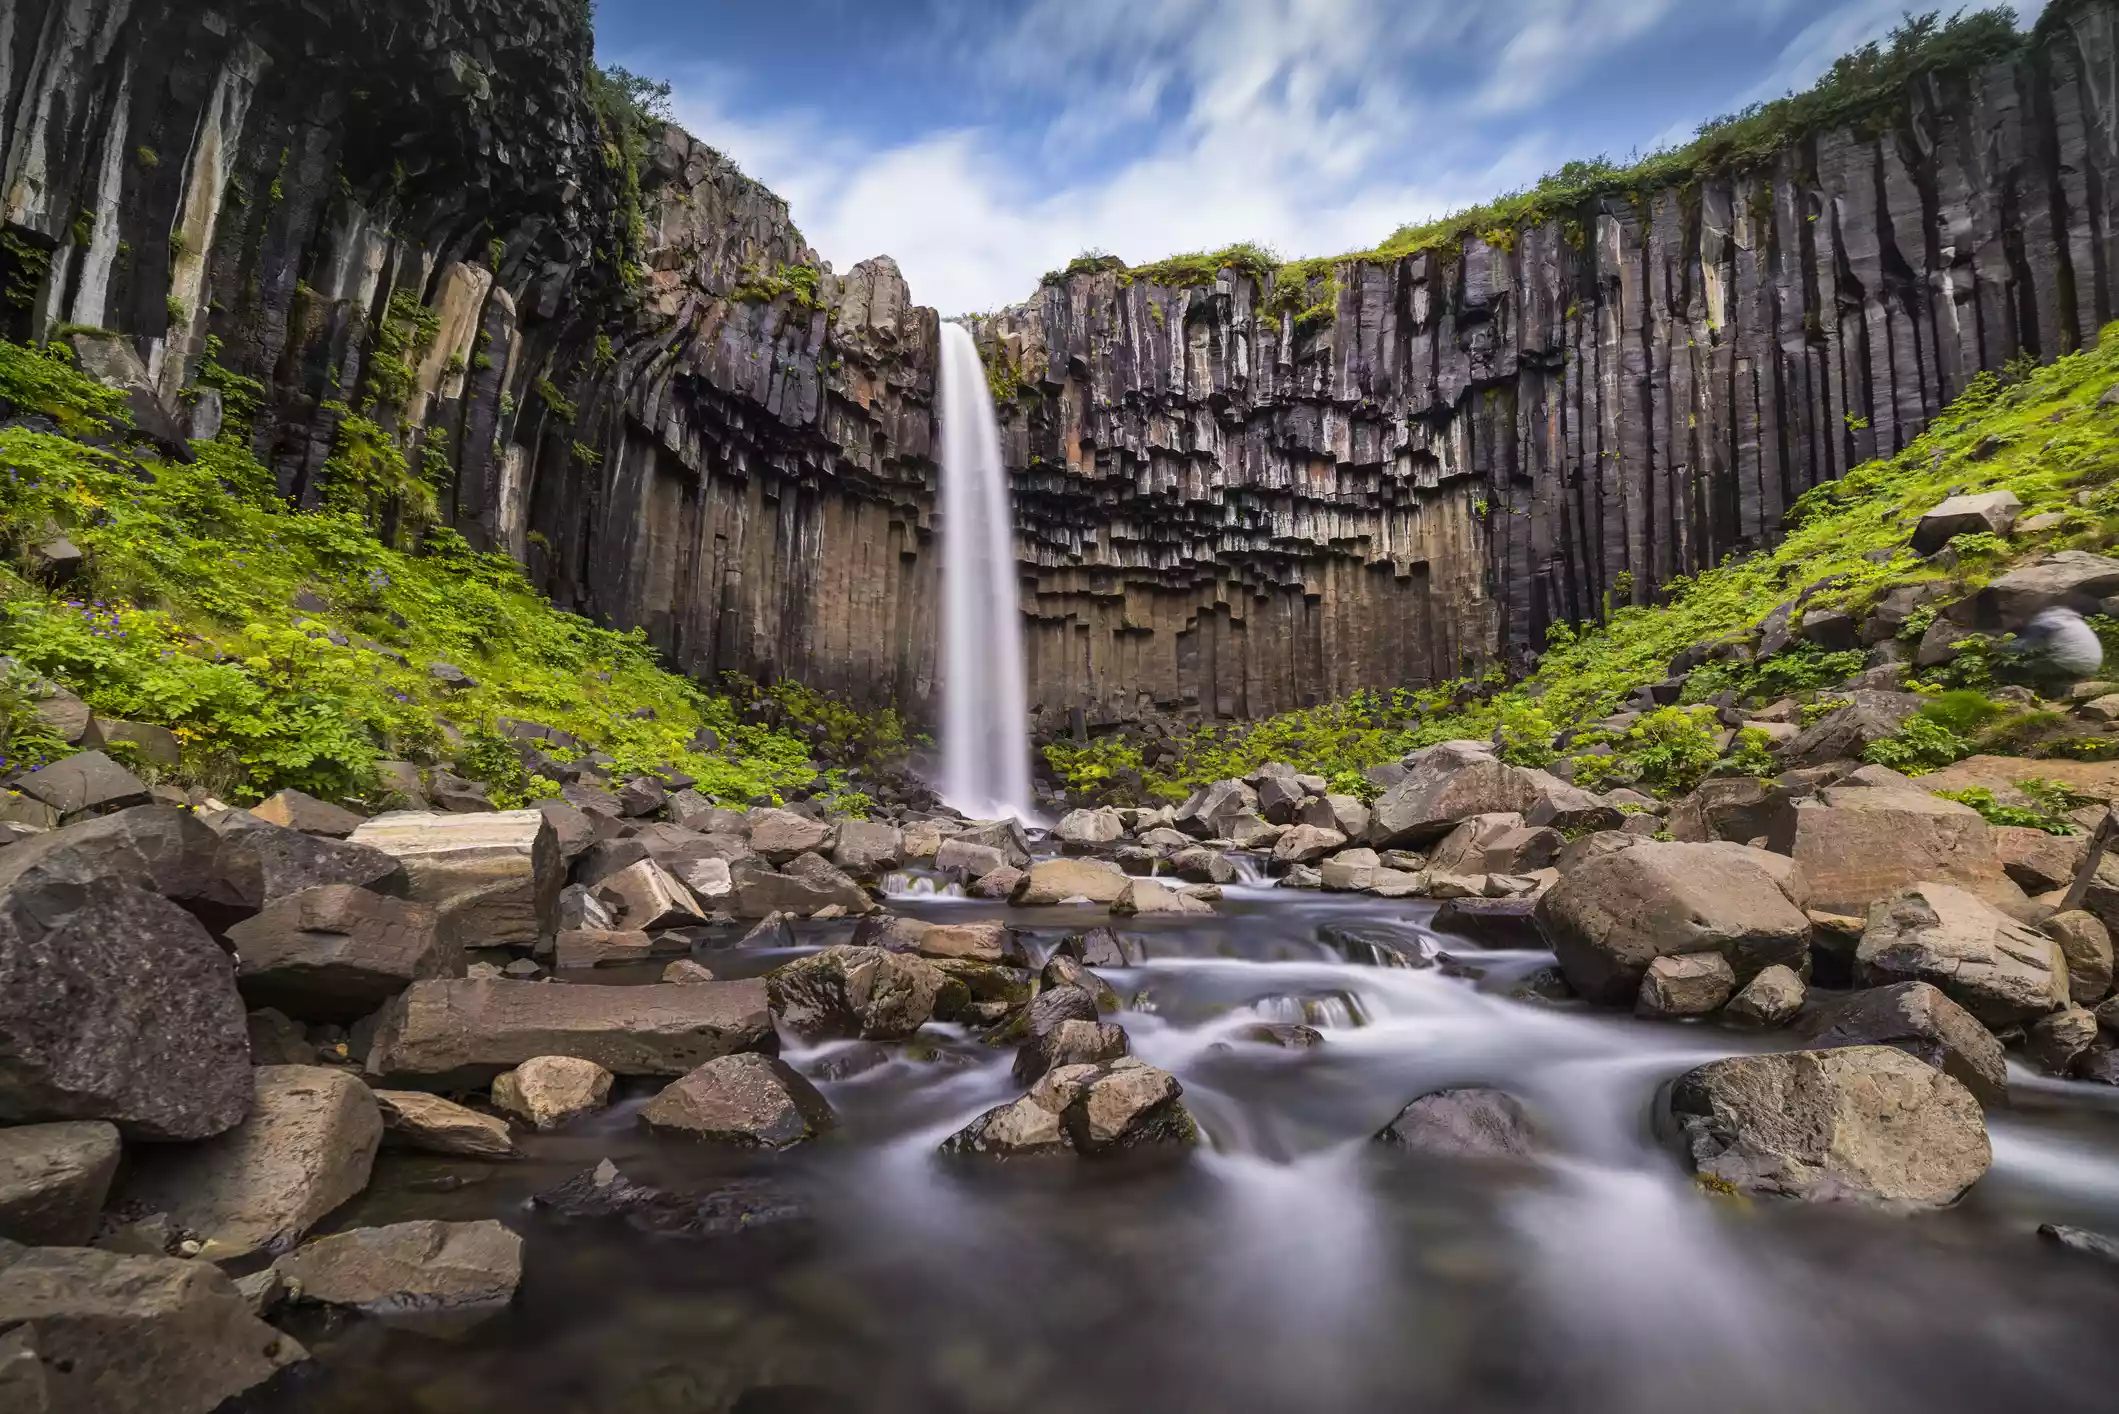 Large waterfall flanked by columnar jointed volcanic rock